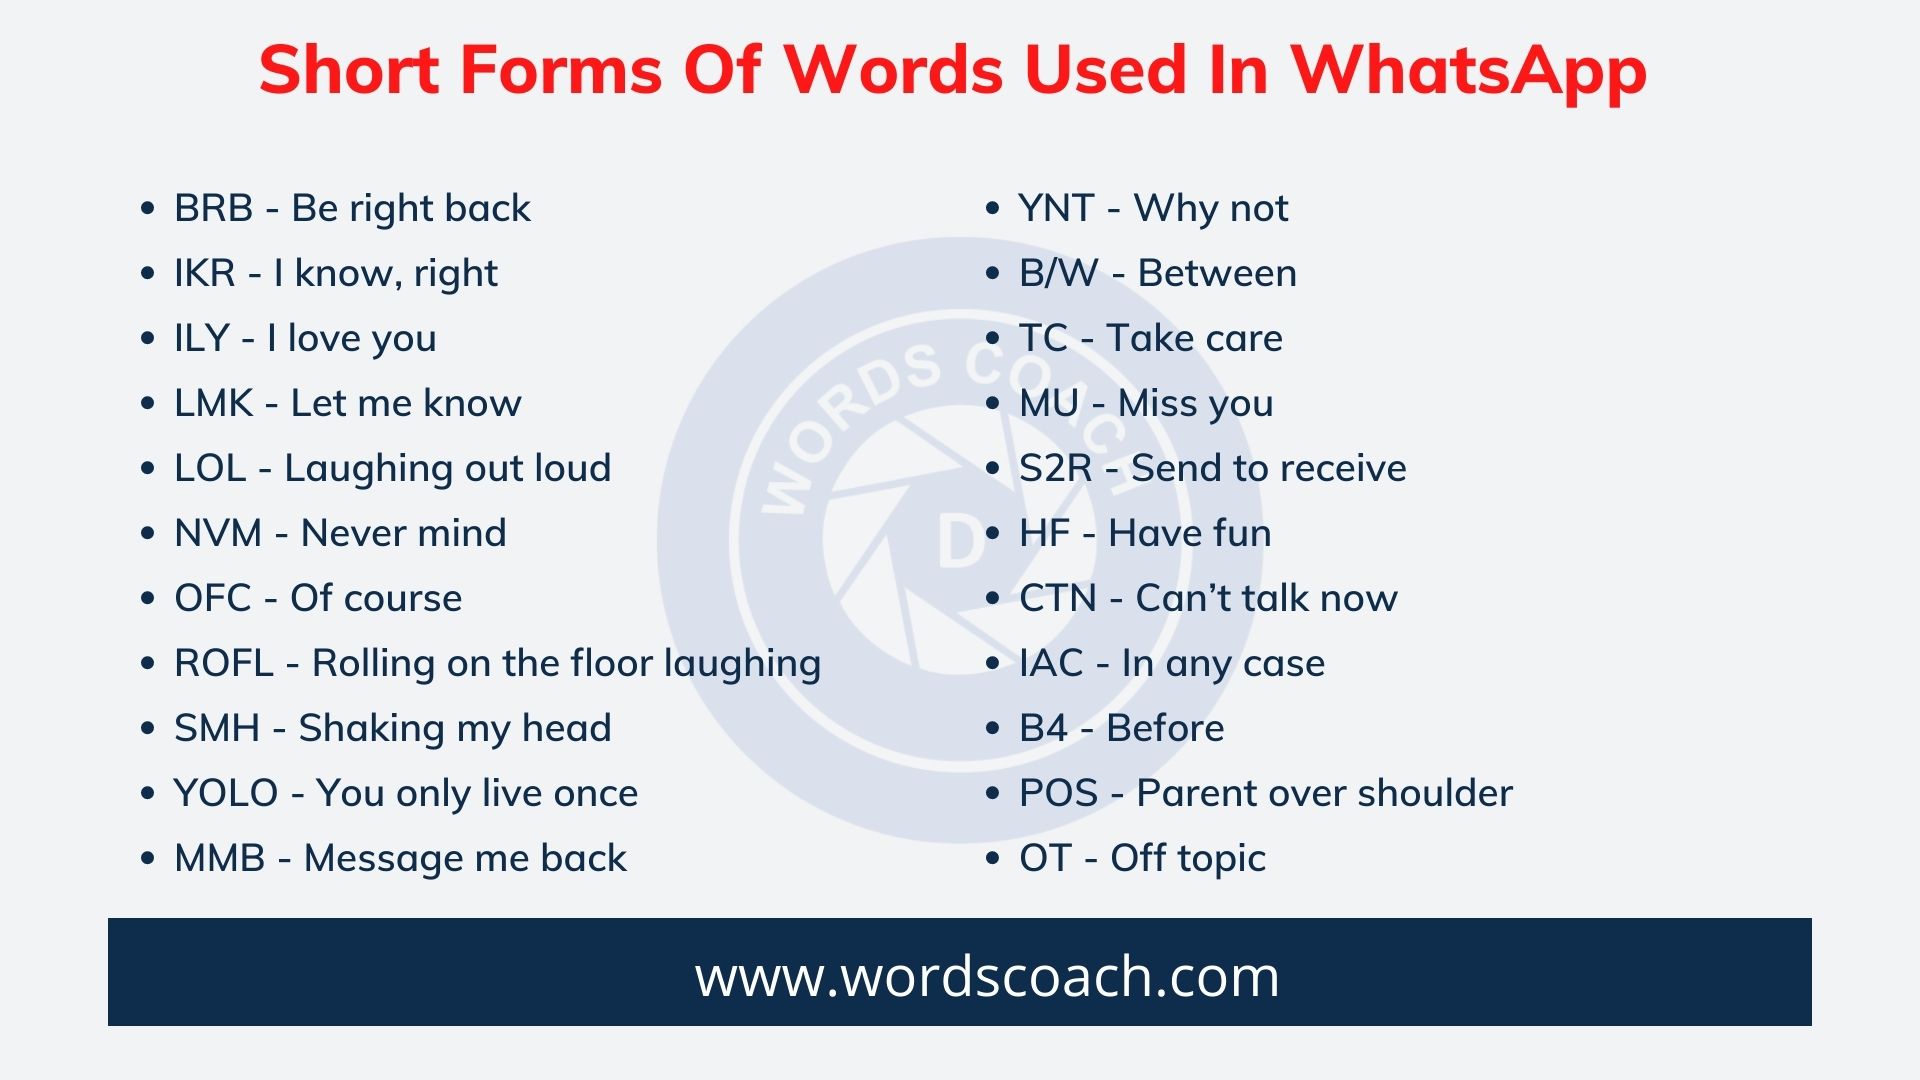 Short Forms Of Words Used In WhatsApp - Word Coach